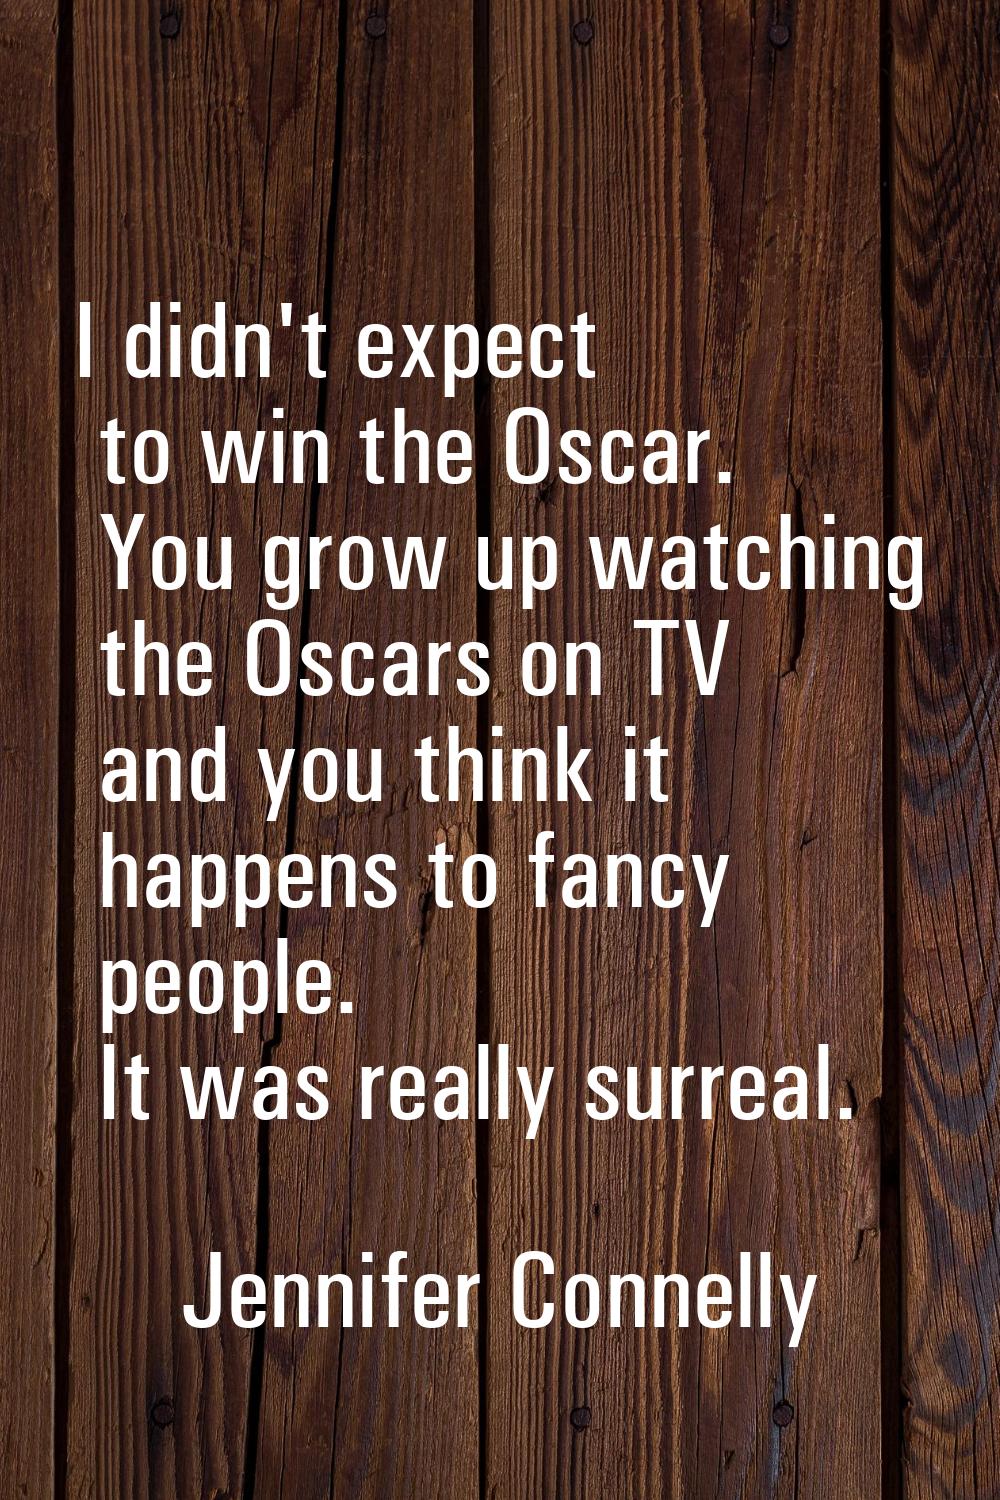 I didn't expect to win the Oscar. You grow up watching the Oscars on TV and you think it happens to